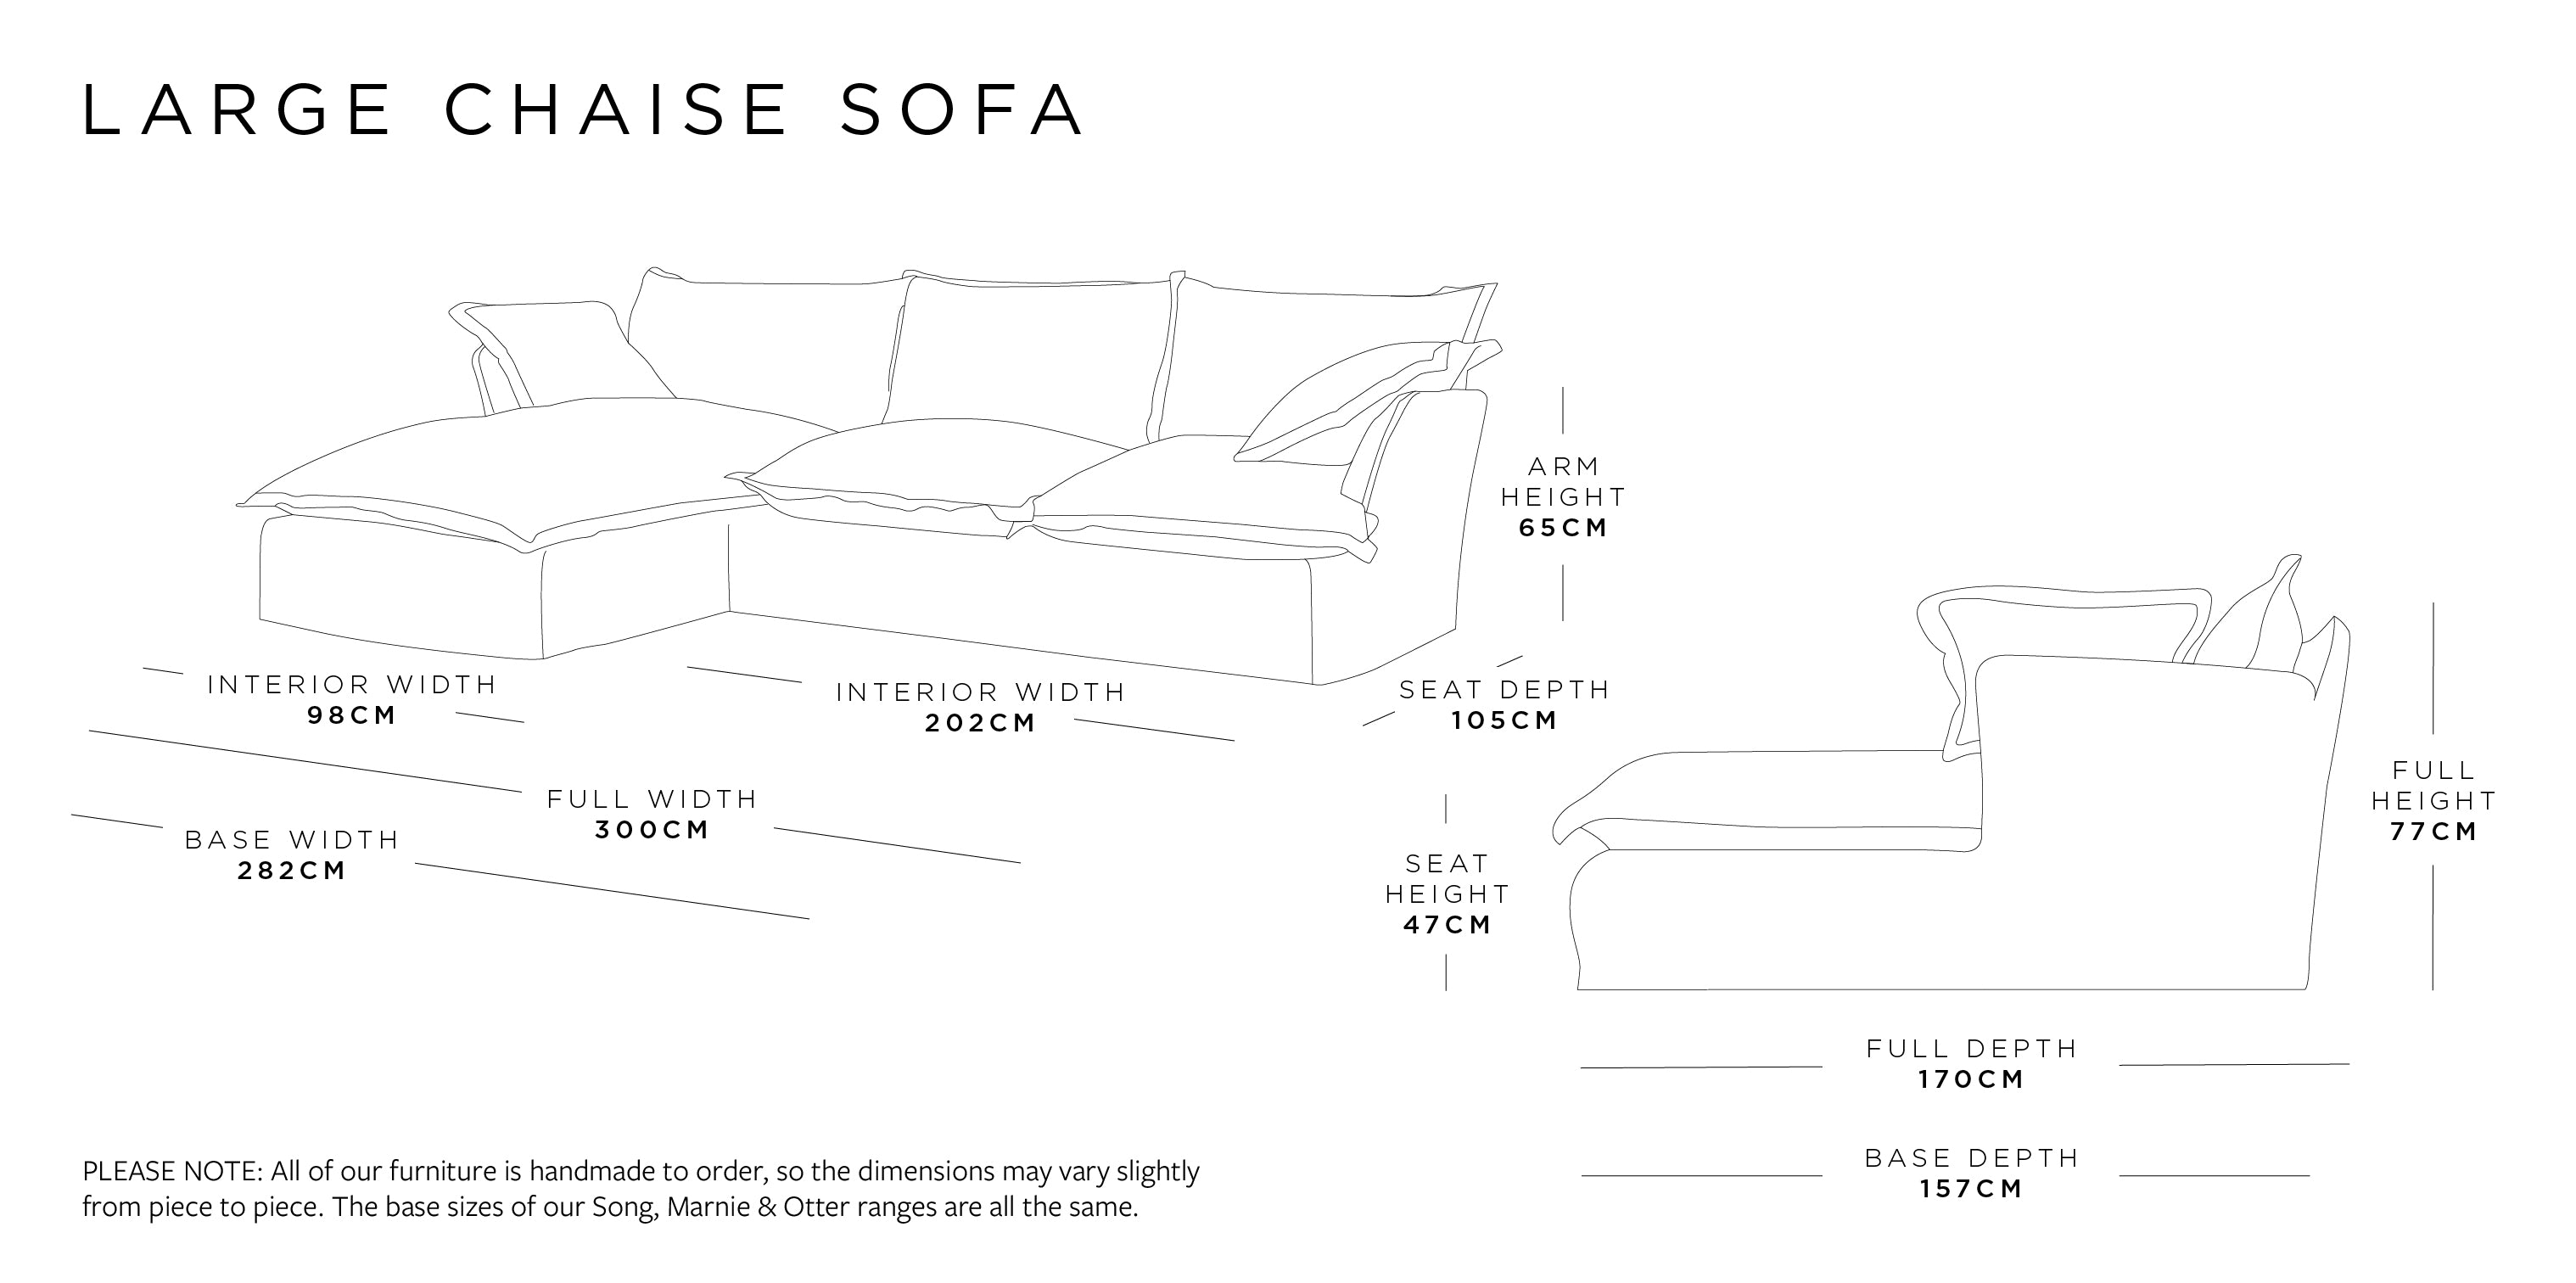 Large Chaise Sofa | Marnie Range Size Guide